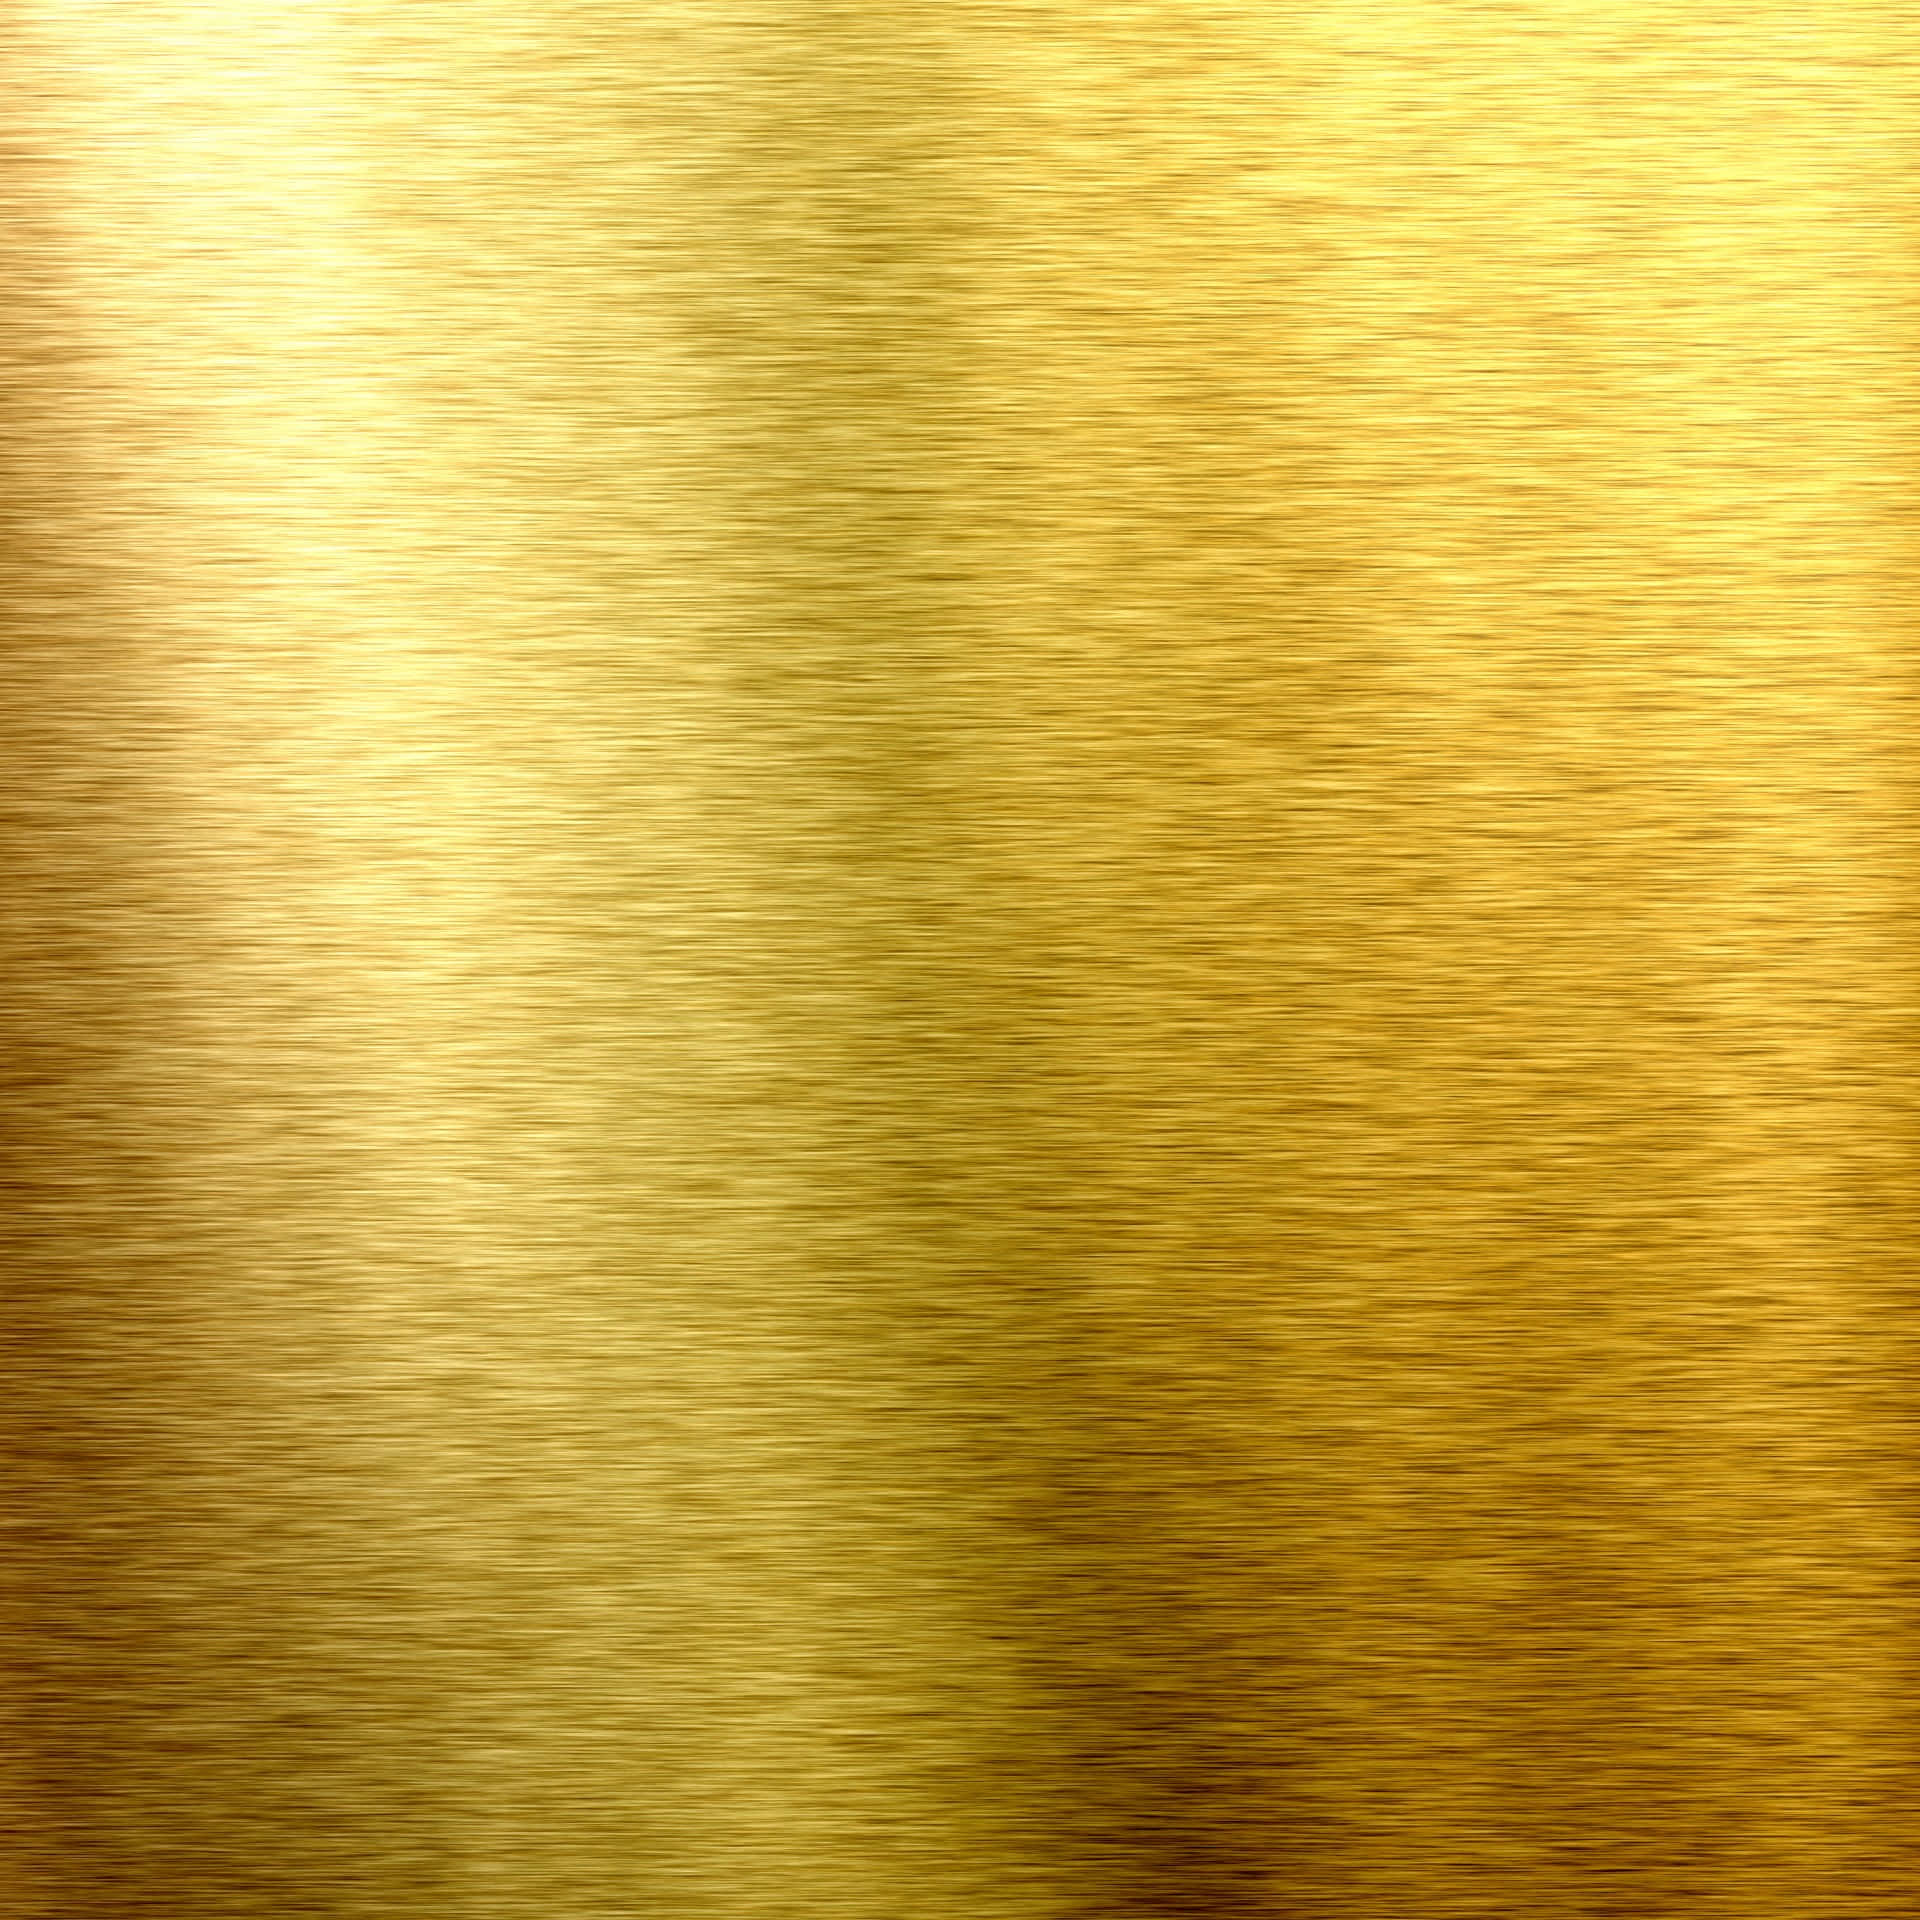 Gold Texture Pictures 1920 X 1920 Picture